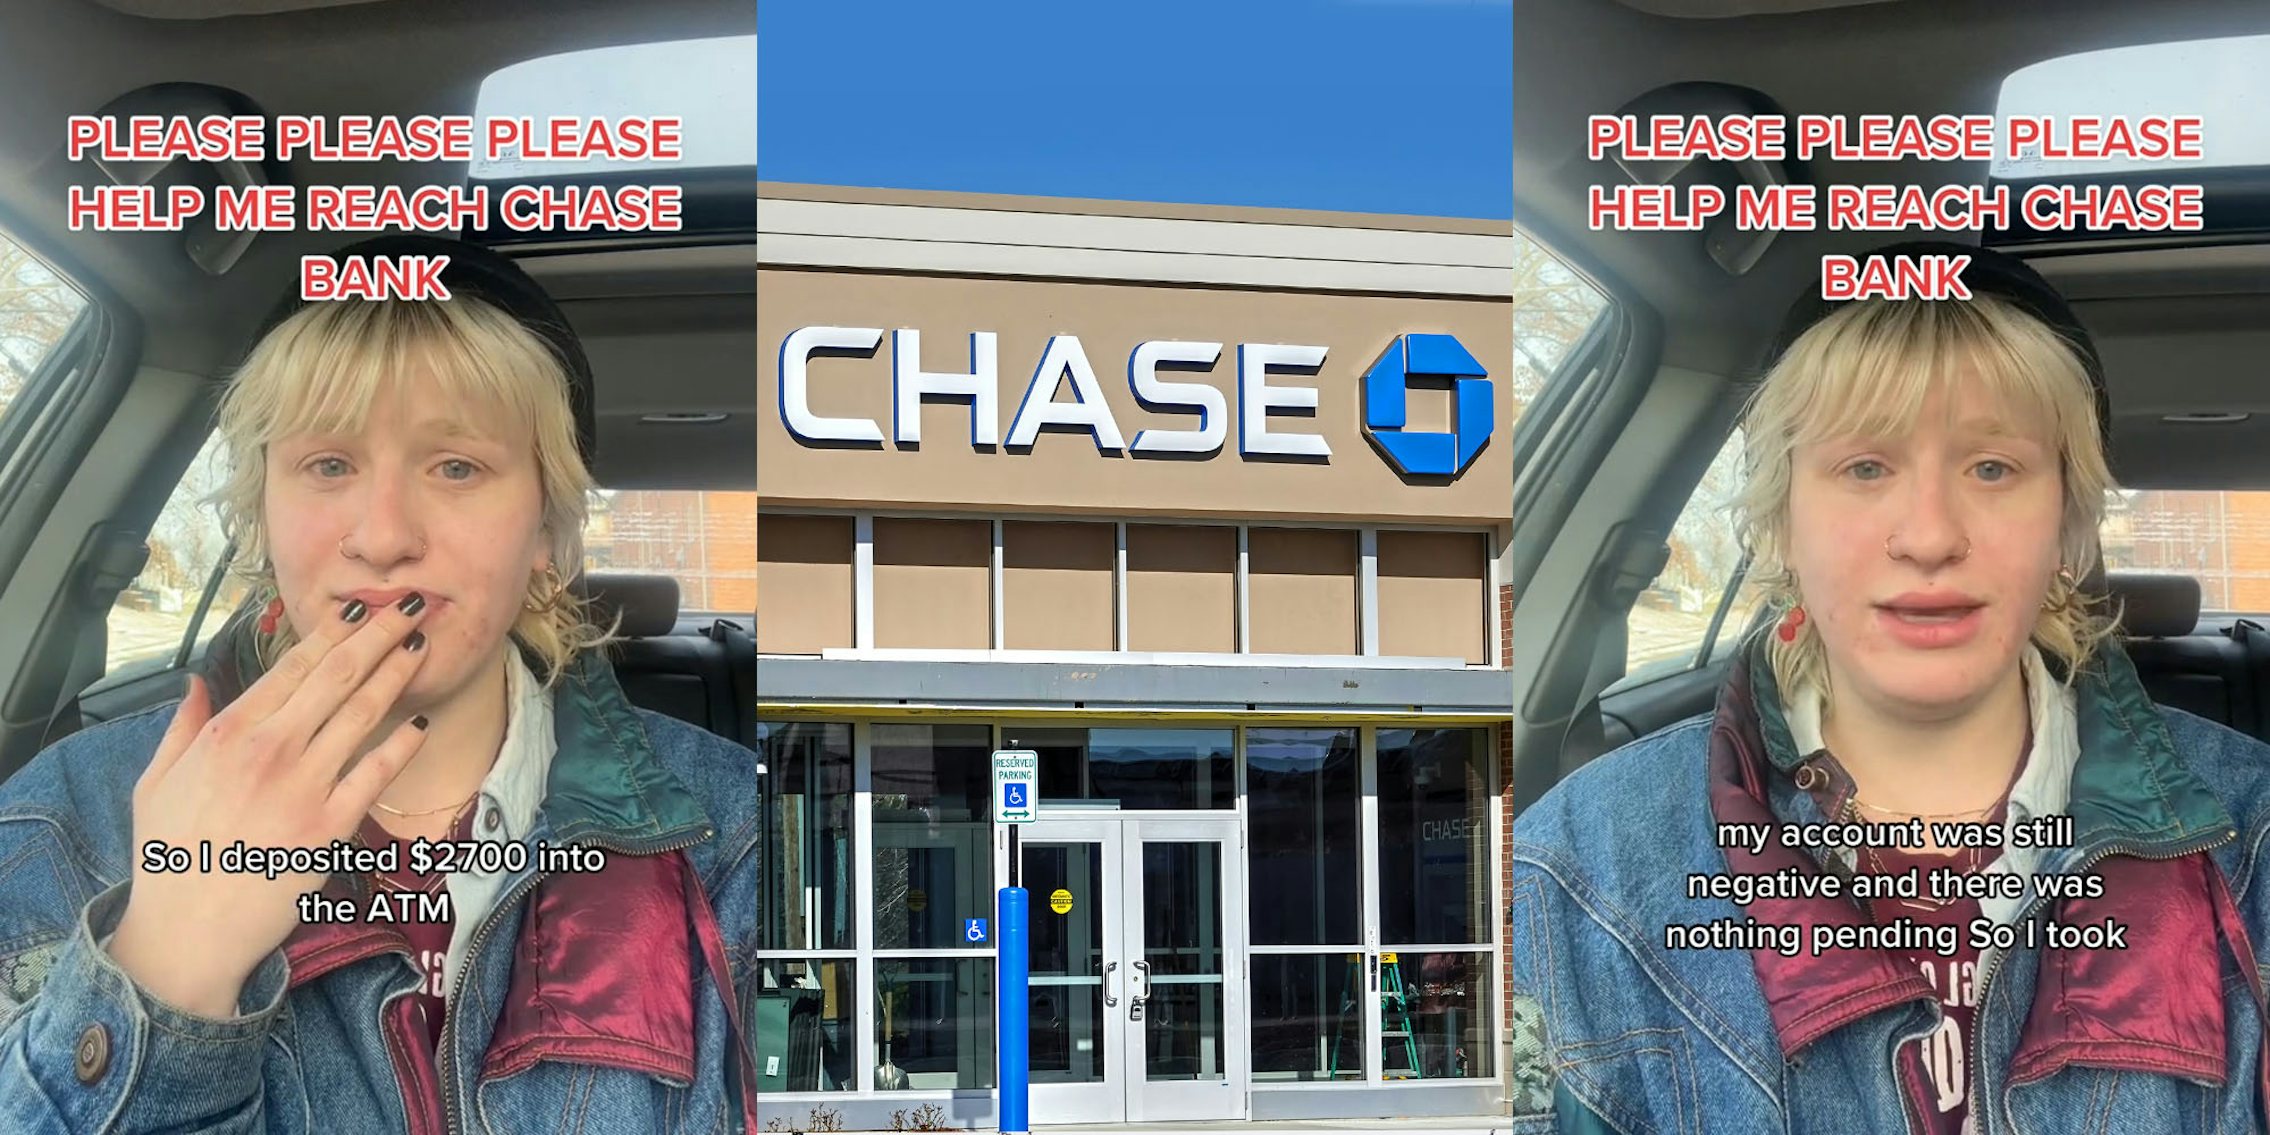 woman in car speaking with hand on mouth caption 'PLEASE PLEASE PLEASE HELP ME REACH CHASE BANK' 'So I deposited $2700 into the ATM' (l) Chase Bank sign on building with blue sky (c) woman in car speaking caption 'PLEASE PLEASE PLEASE HELP ME REACH CHASE BANK' 'my account was still negative and there was nothing pending. So I took' (r)